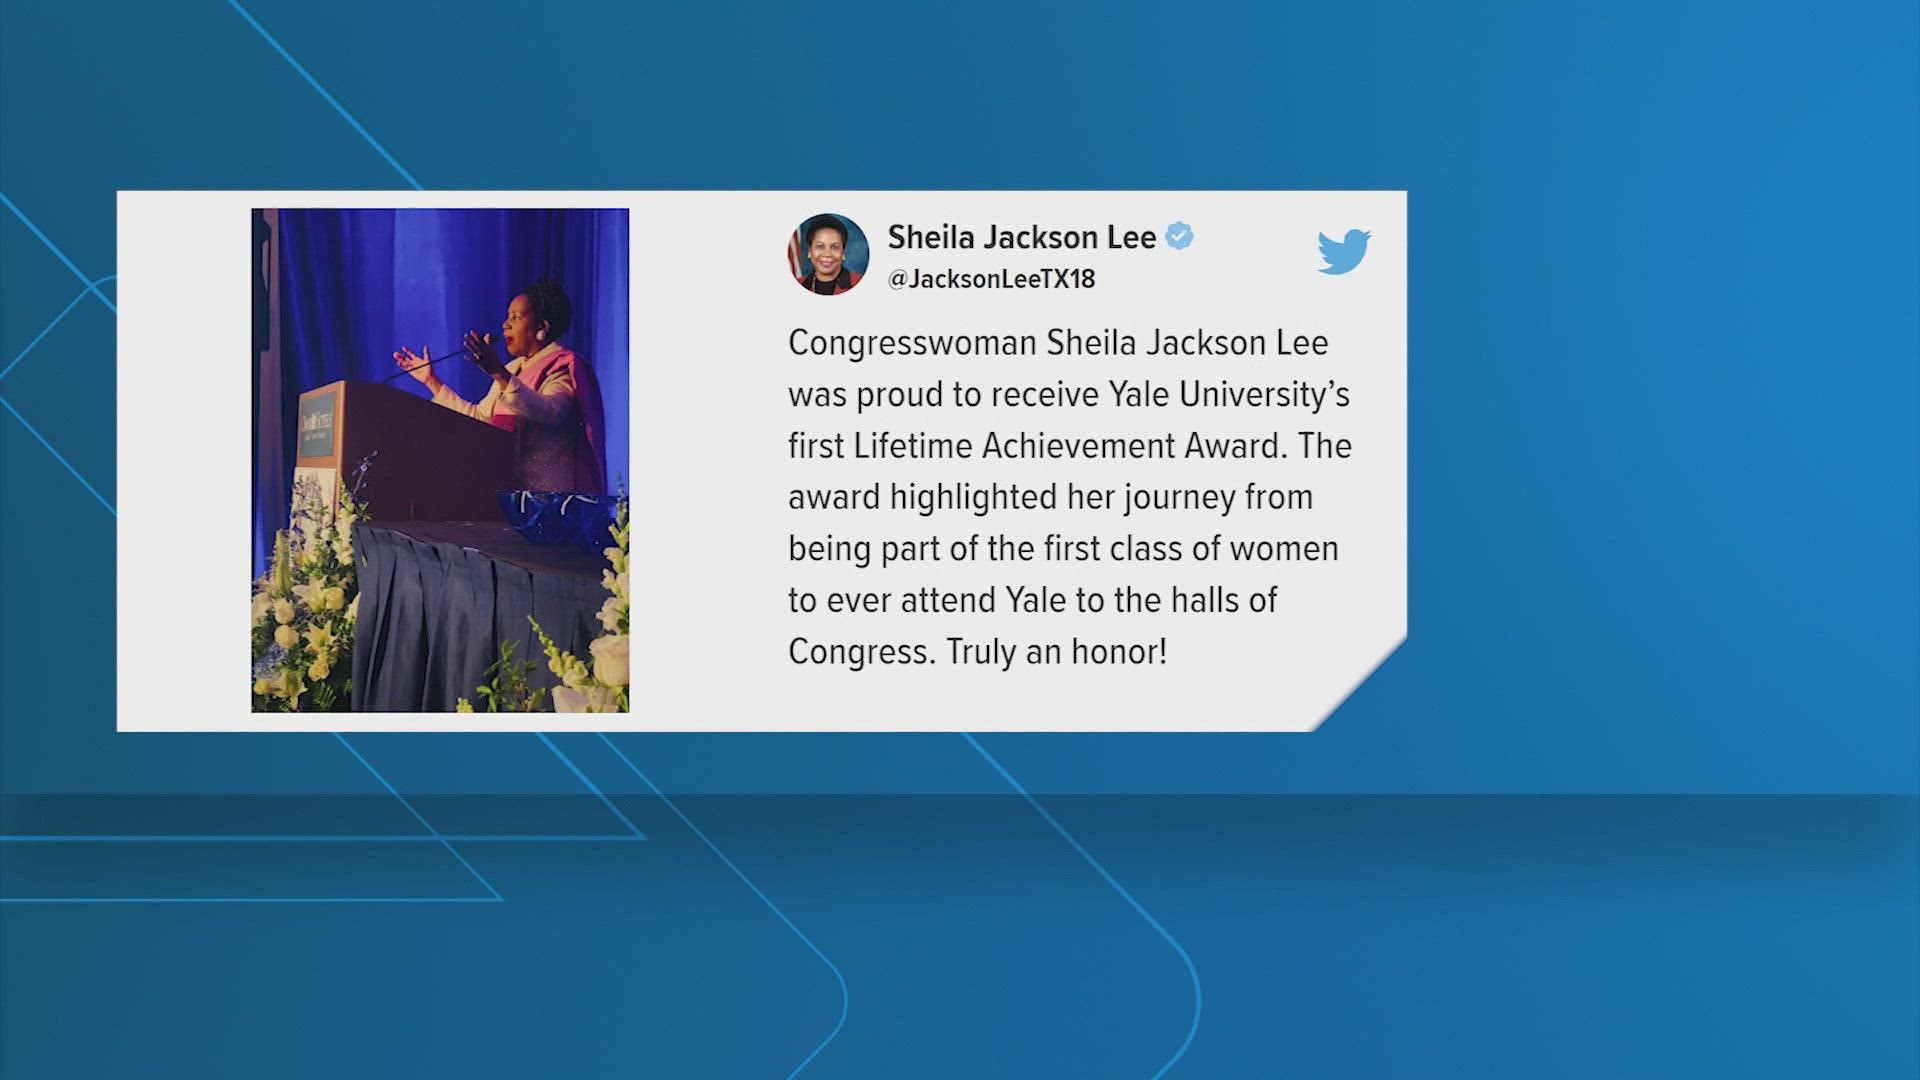 Congresswoman Sheila Jackson Lee was honored at Yale over the weekend.